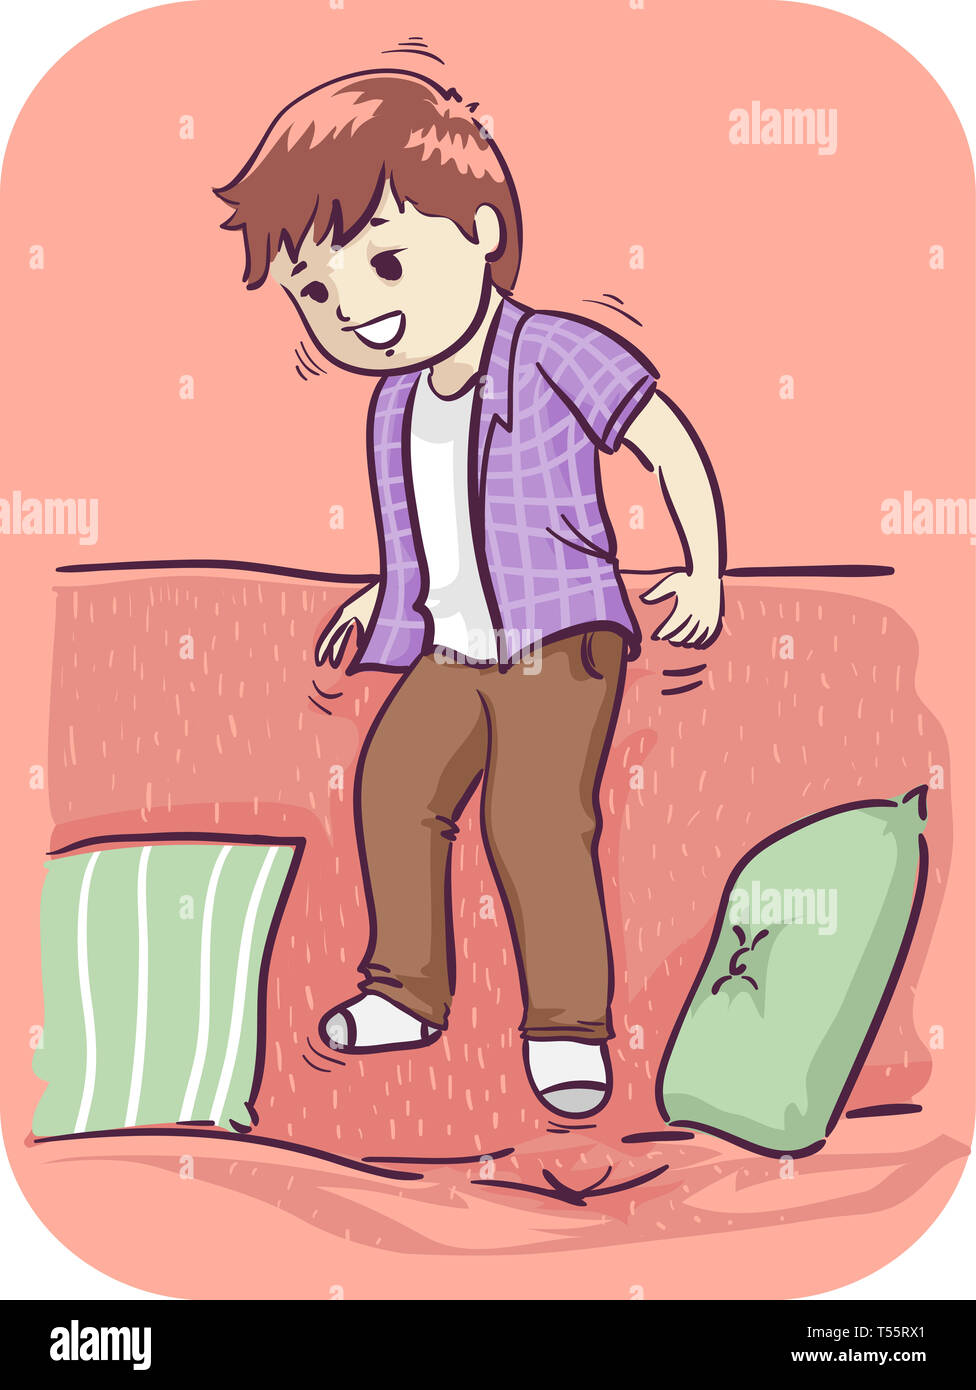 Illustration of a Kid Boy Jumping on the Sofa, Unable to Sit Still Stock Photo